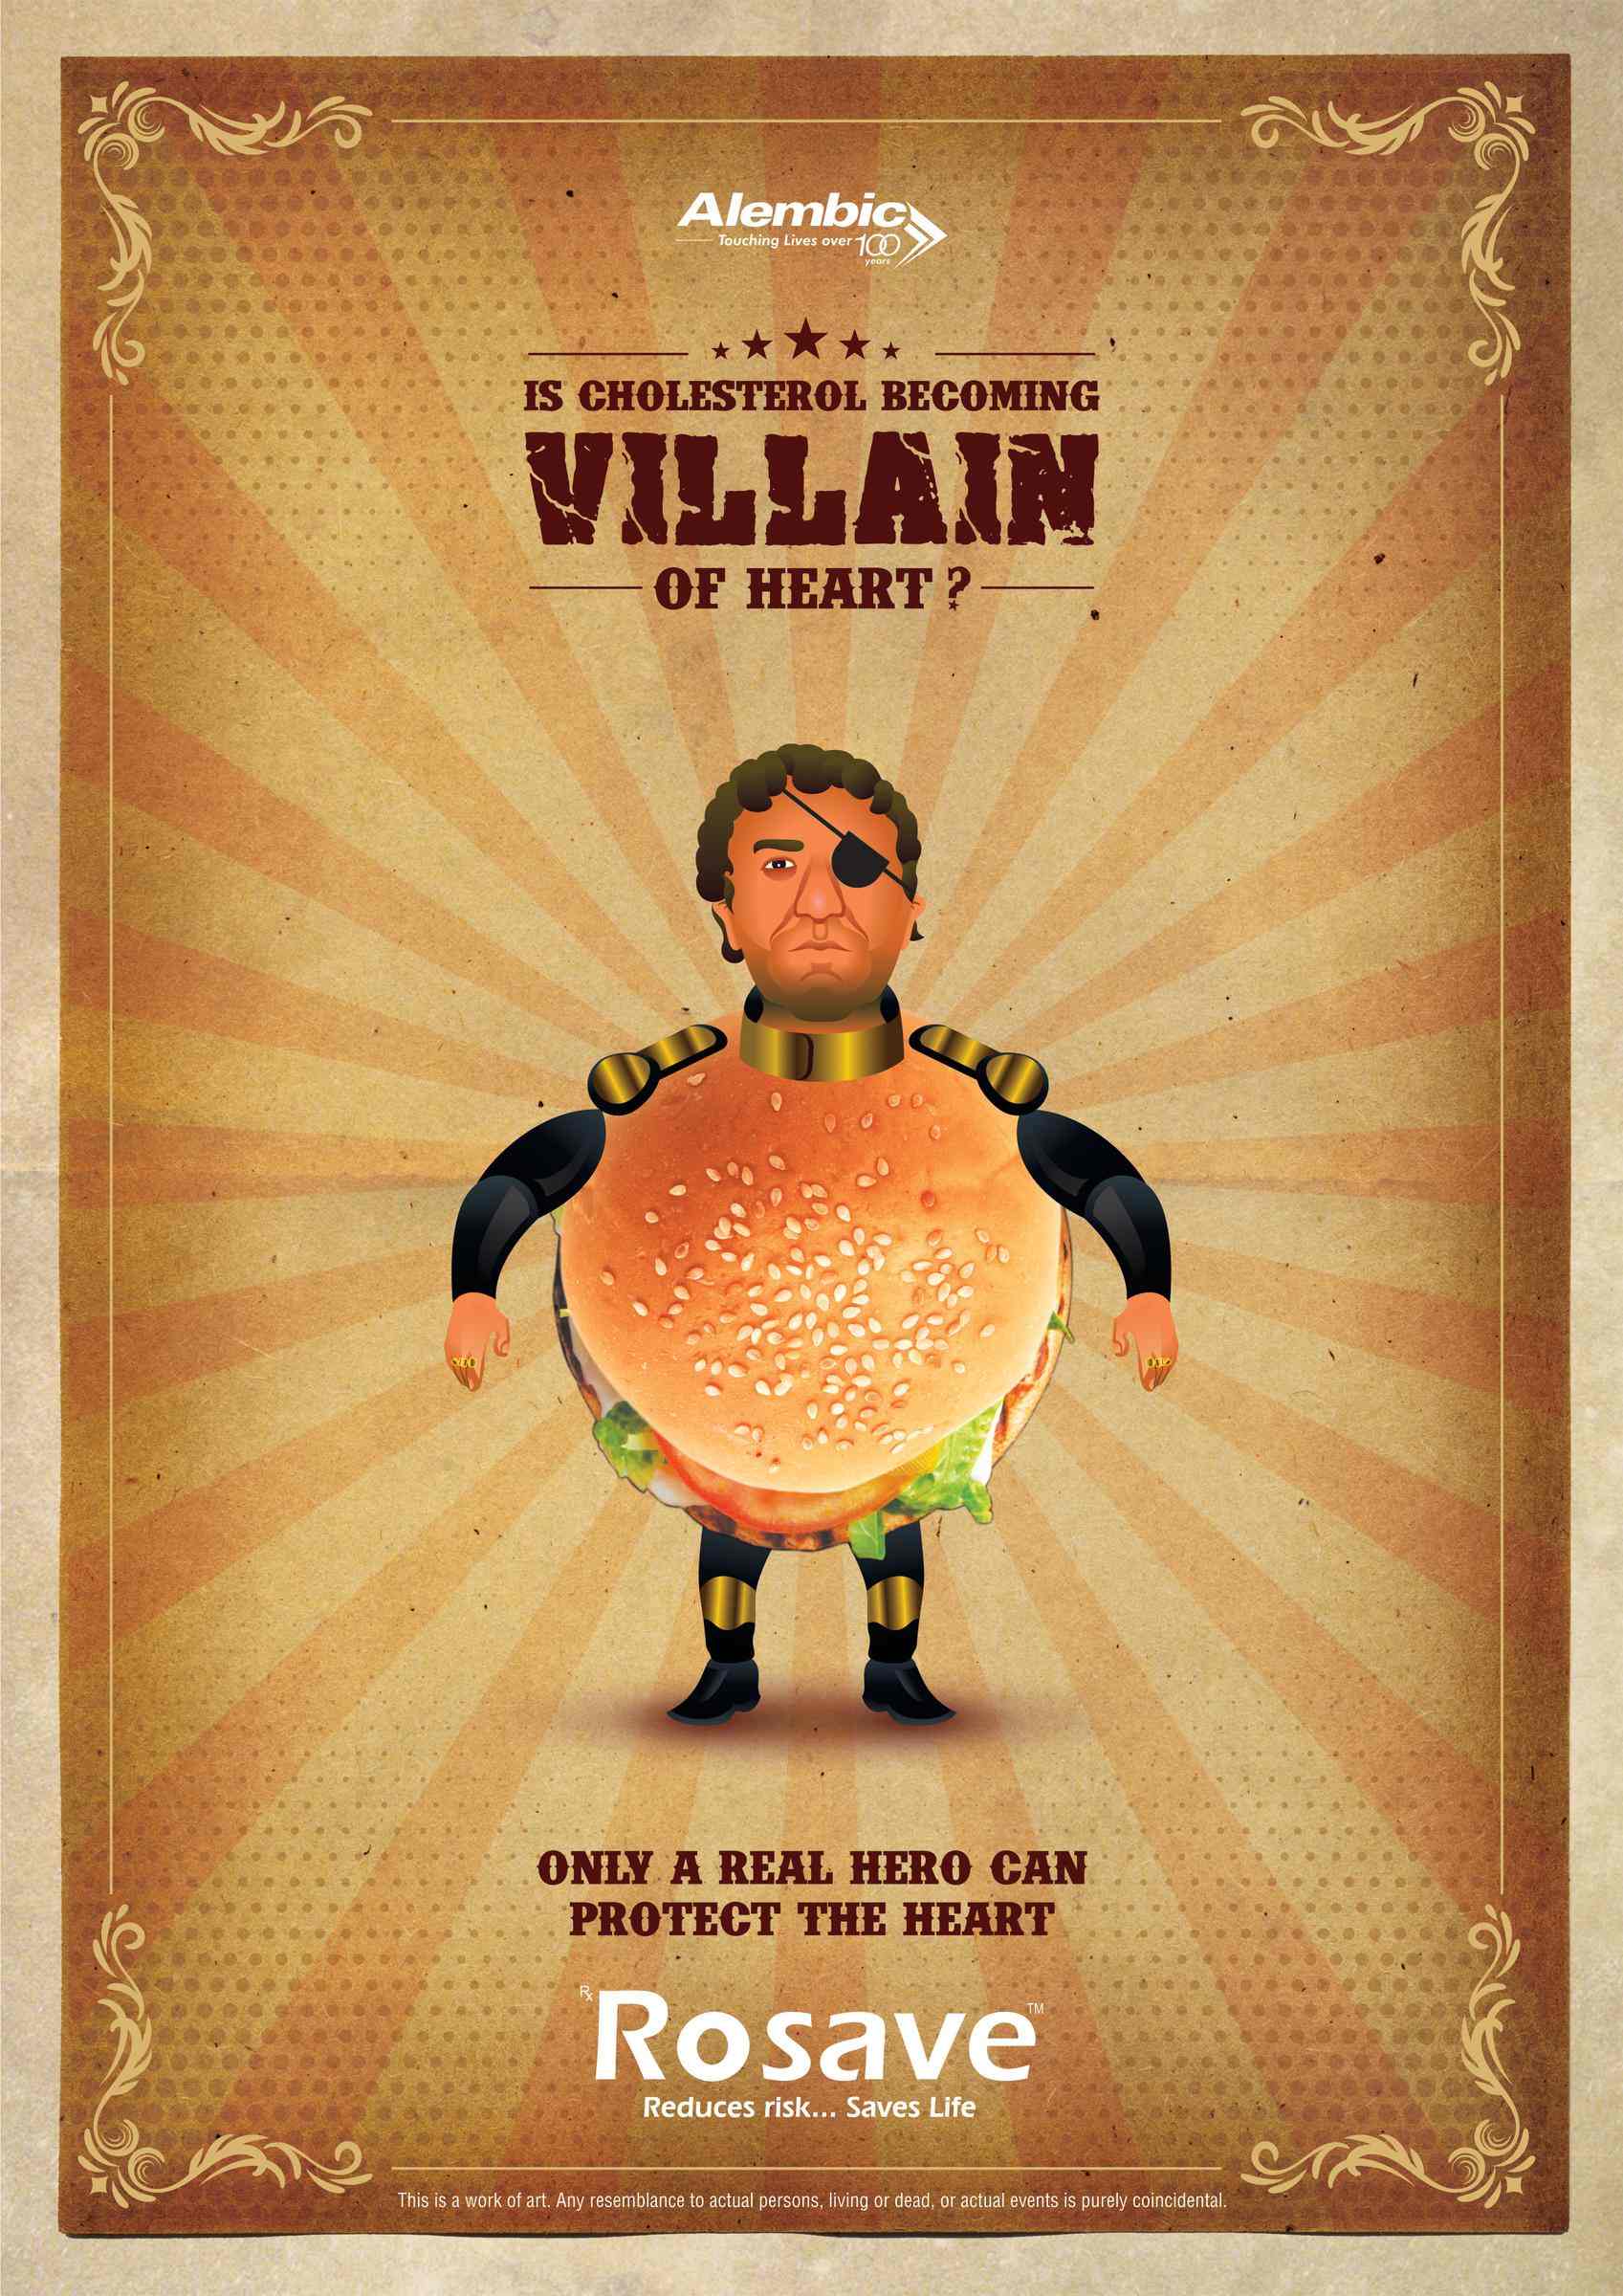 Rosave: Villains of the heart | Print advertising